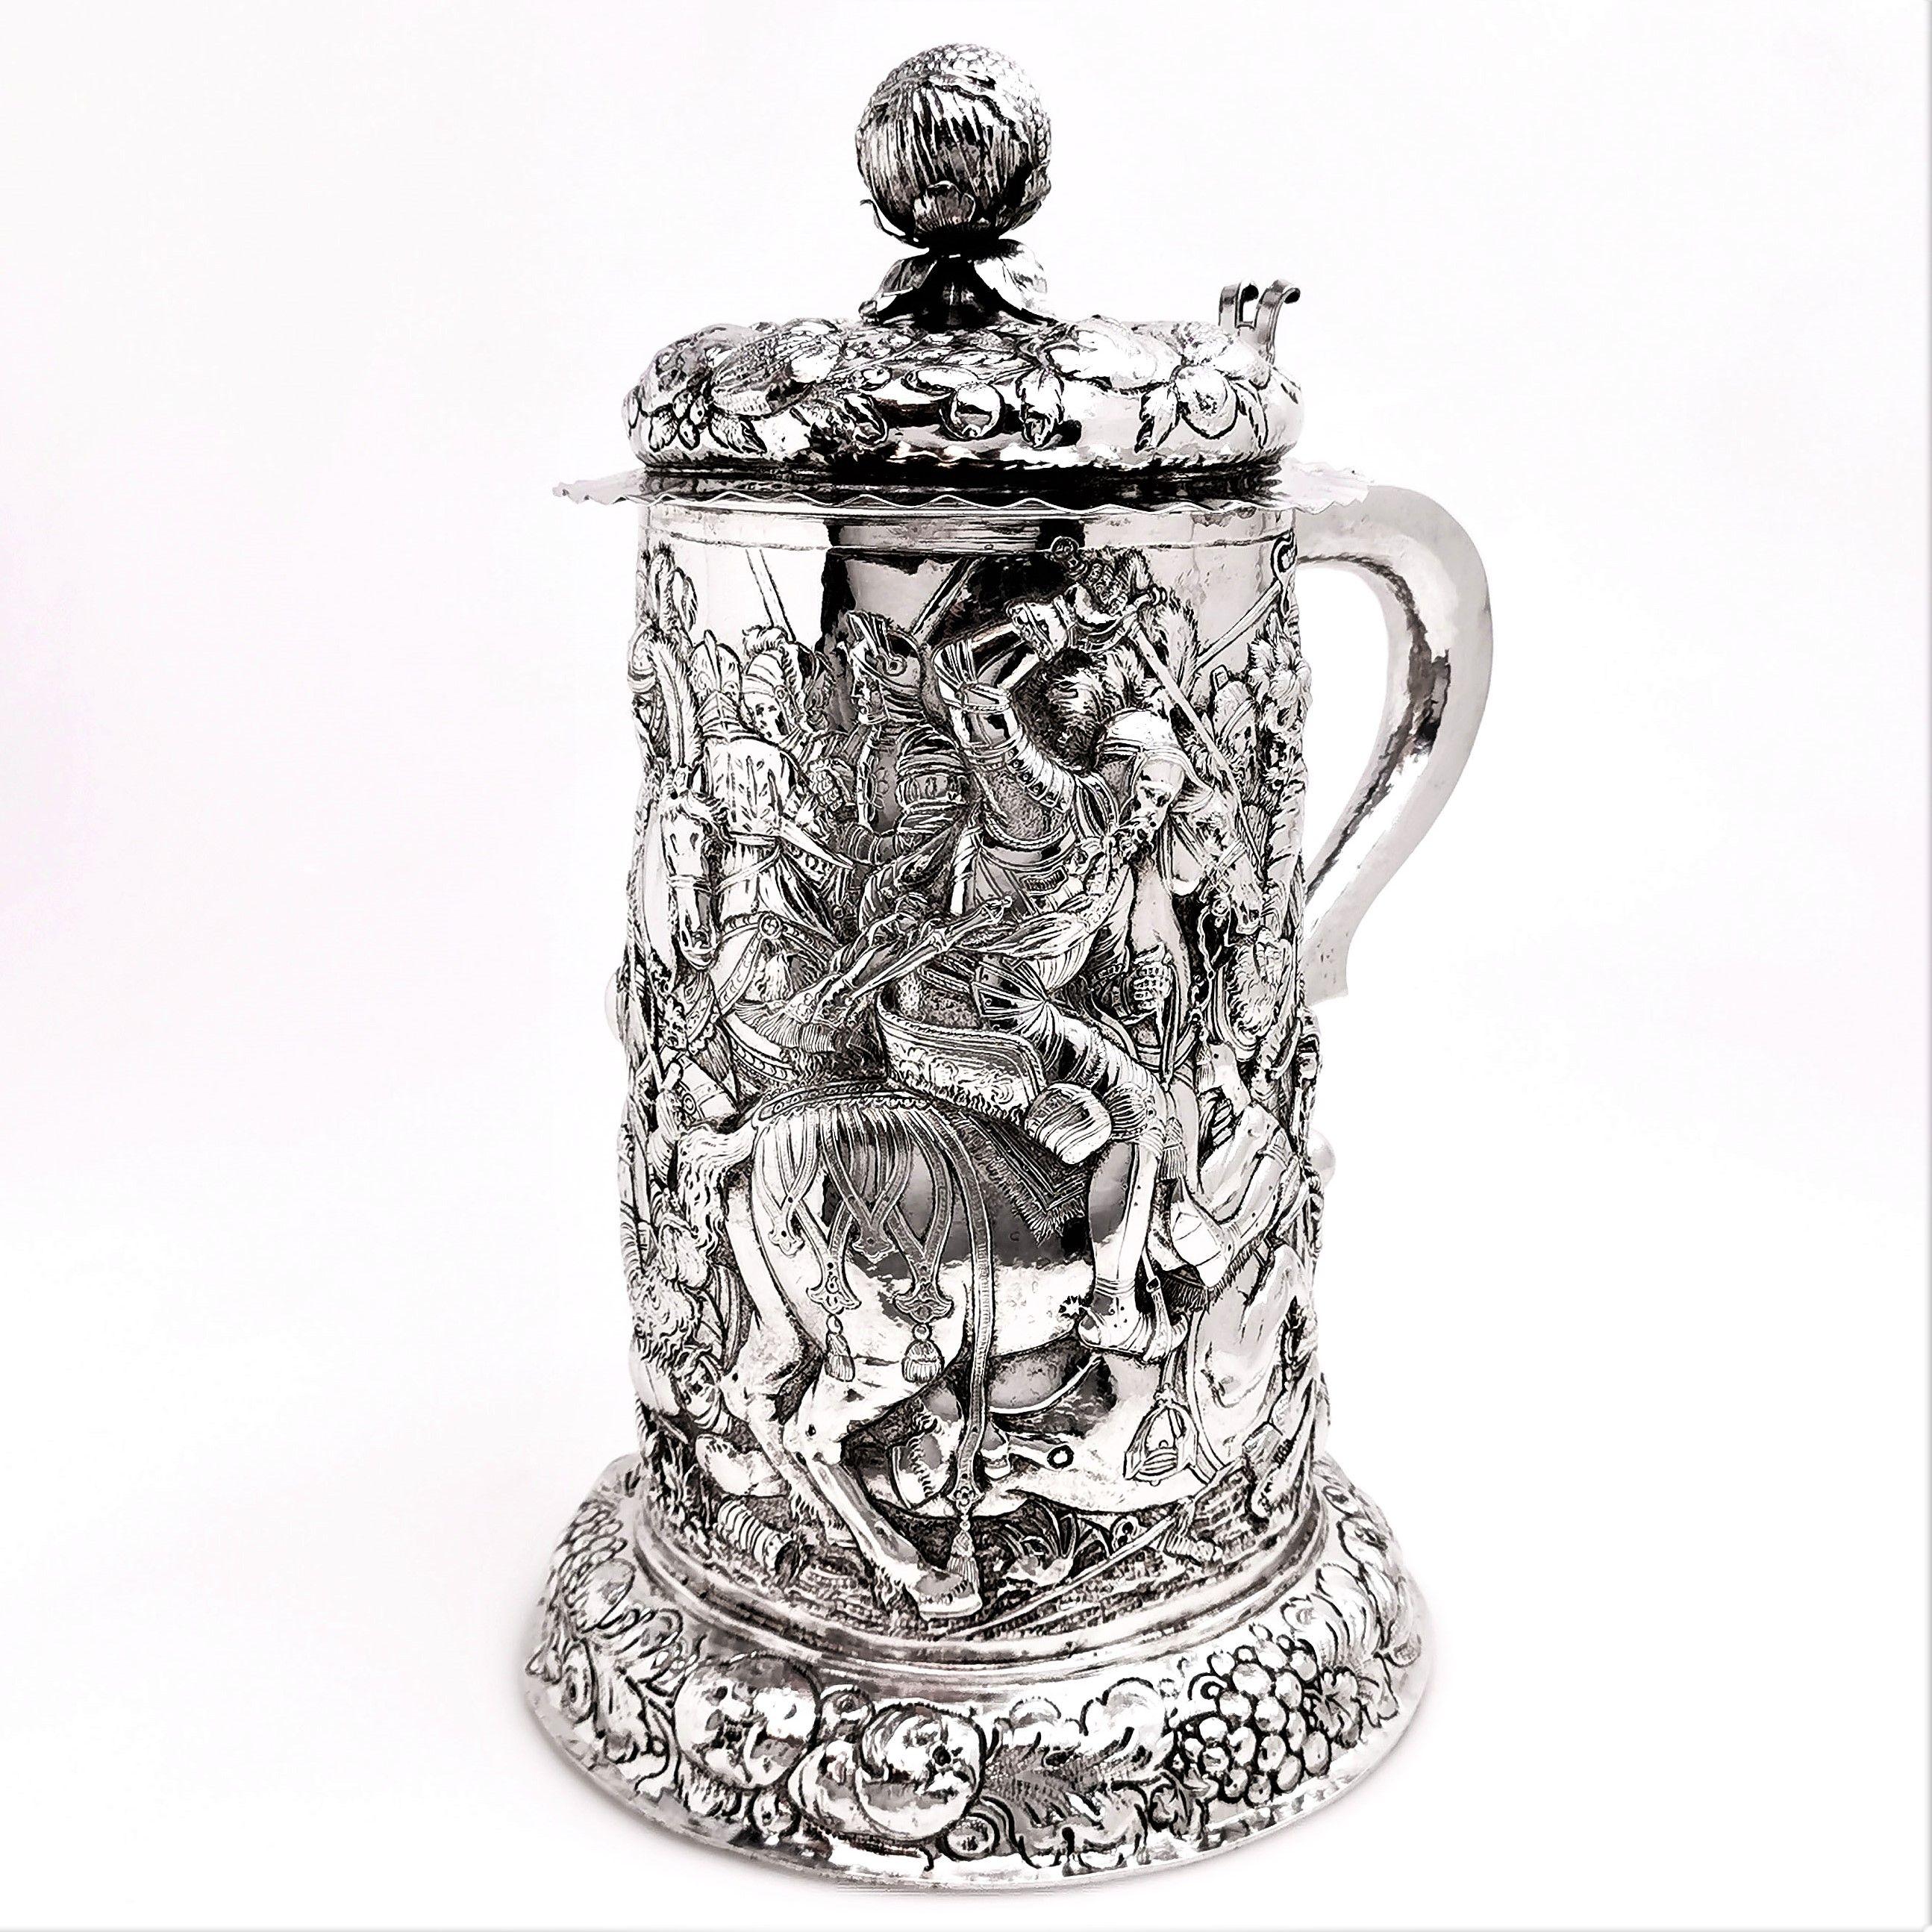 A magnificent over sized antique German solid silver Historismus Tankard / Stein covered in an ornate design featuring a group of Knights in Armour in the midst of a battle.The base of the tankard has a wide spread pedestal foot, also featuring